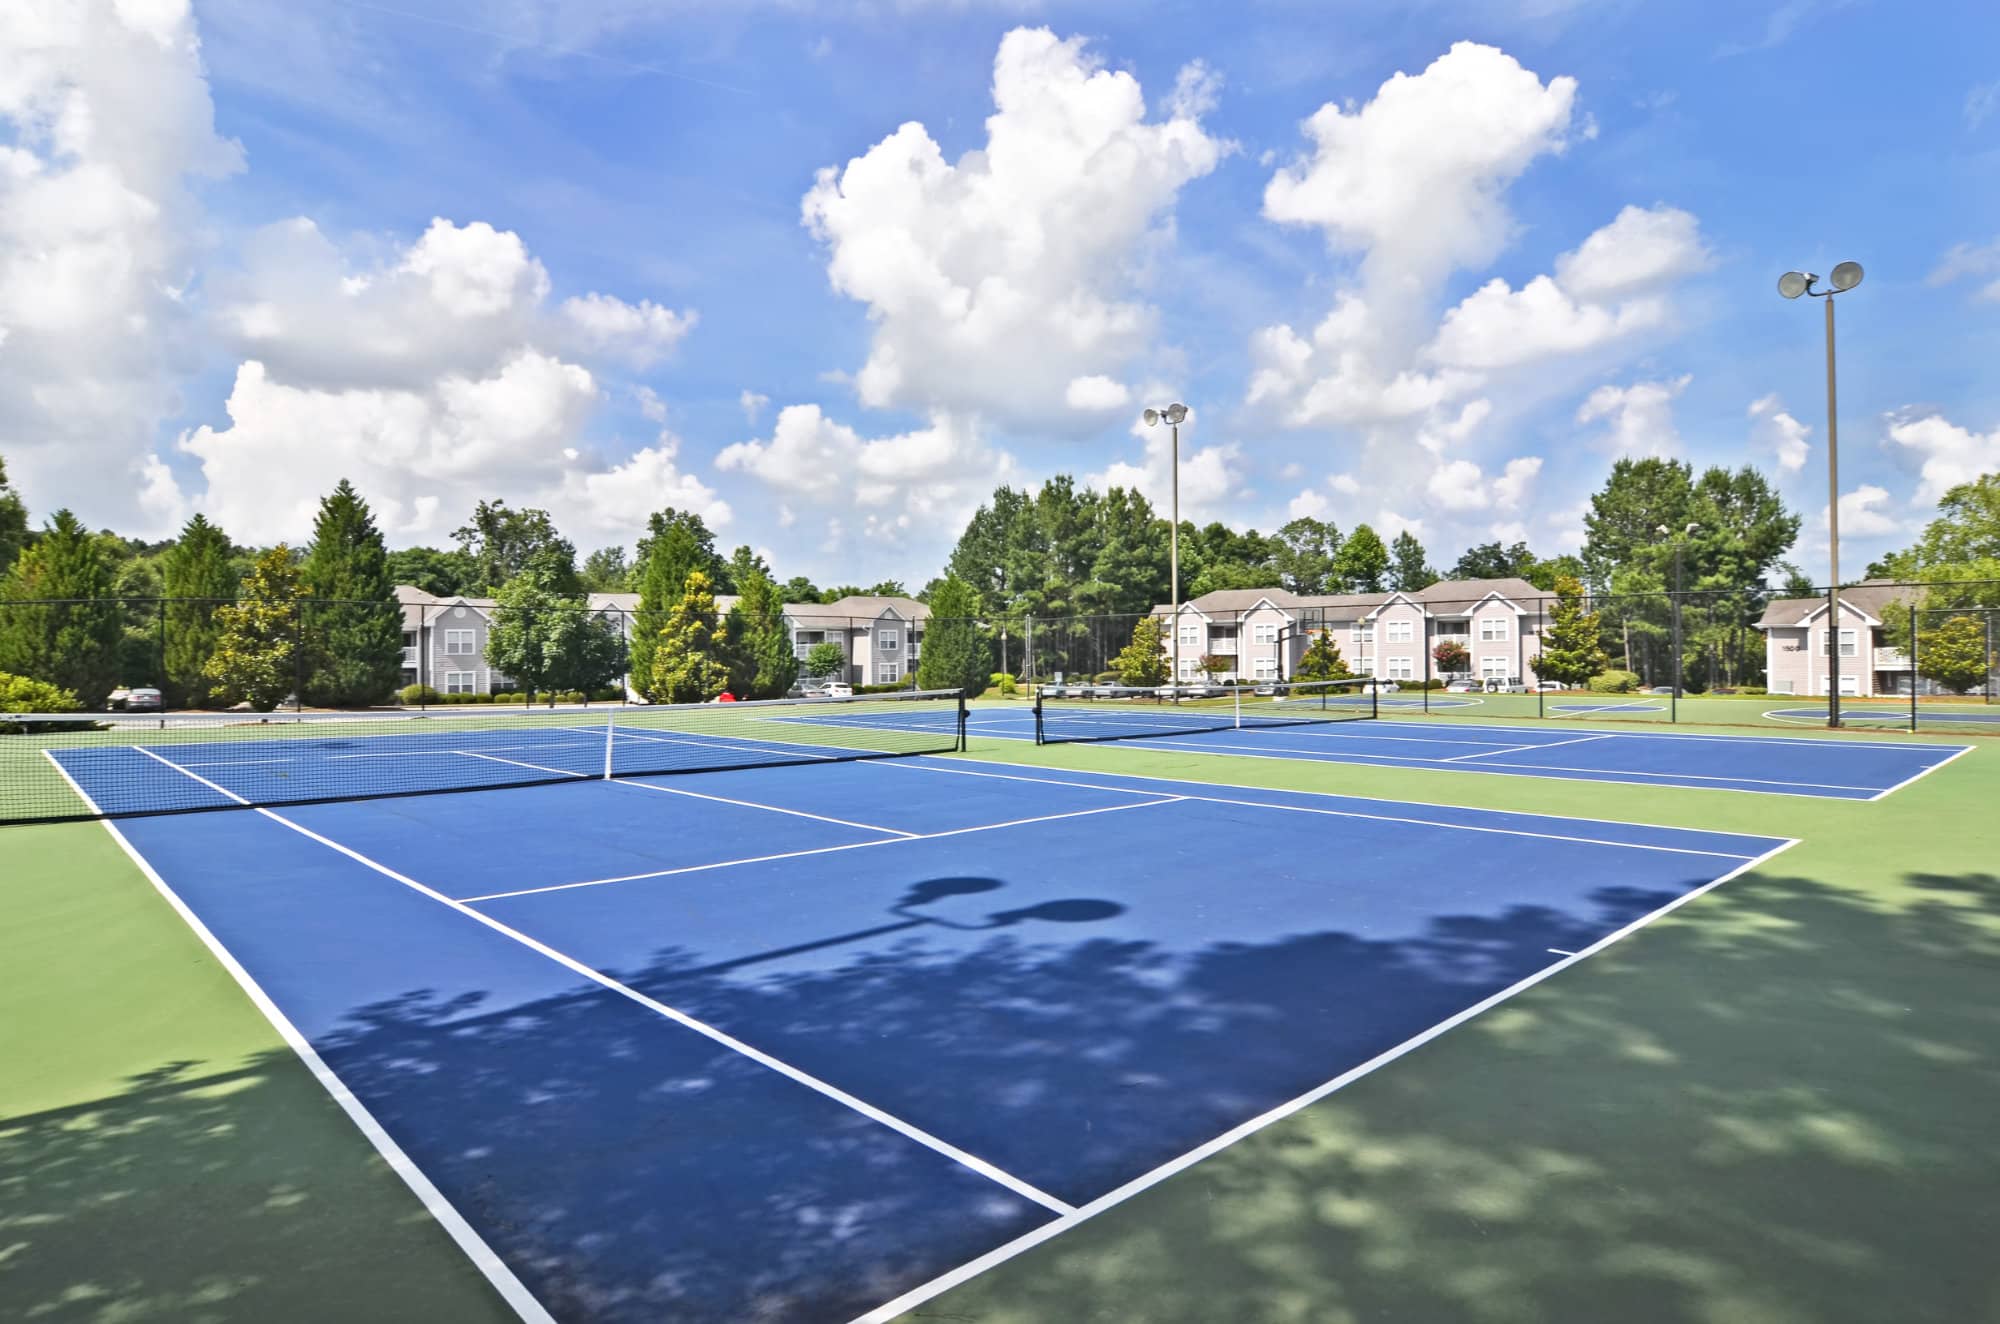 river-club-athens-the-townhomes-at-river-club-off-campus-apartments-near-the-university-of-georgia-tennis-court